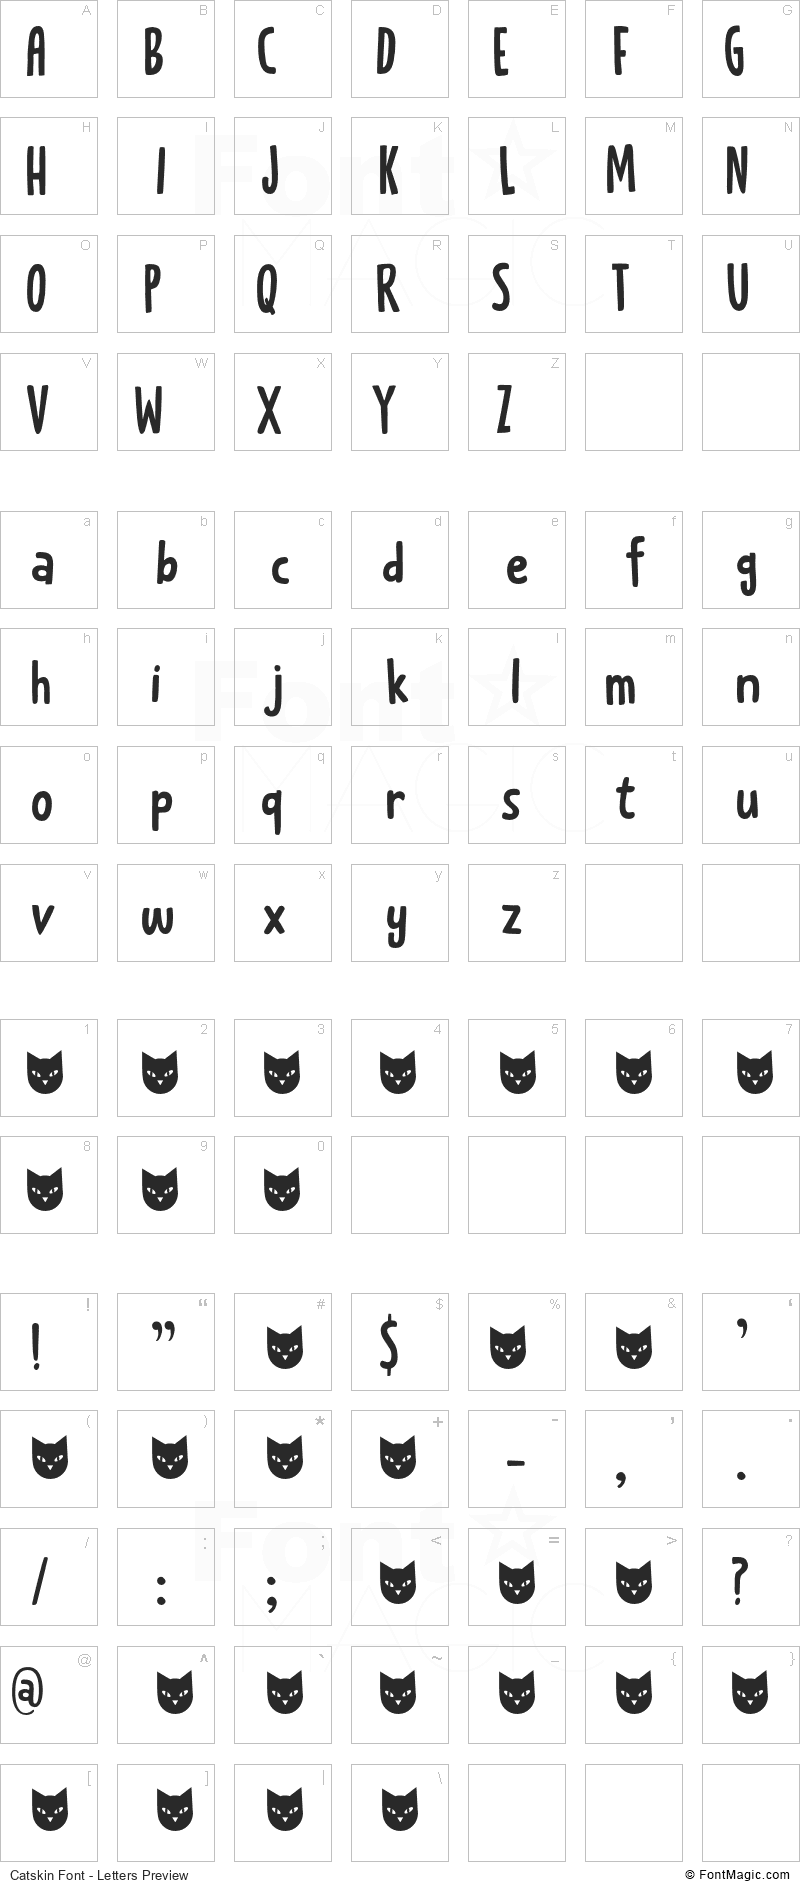 Catskin Font - All Latters Preview Chart